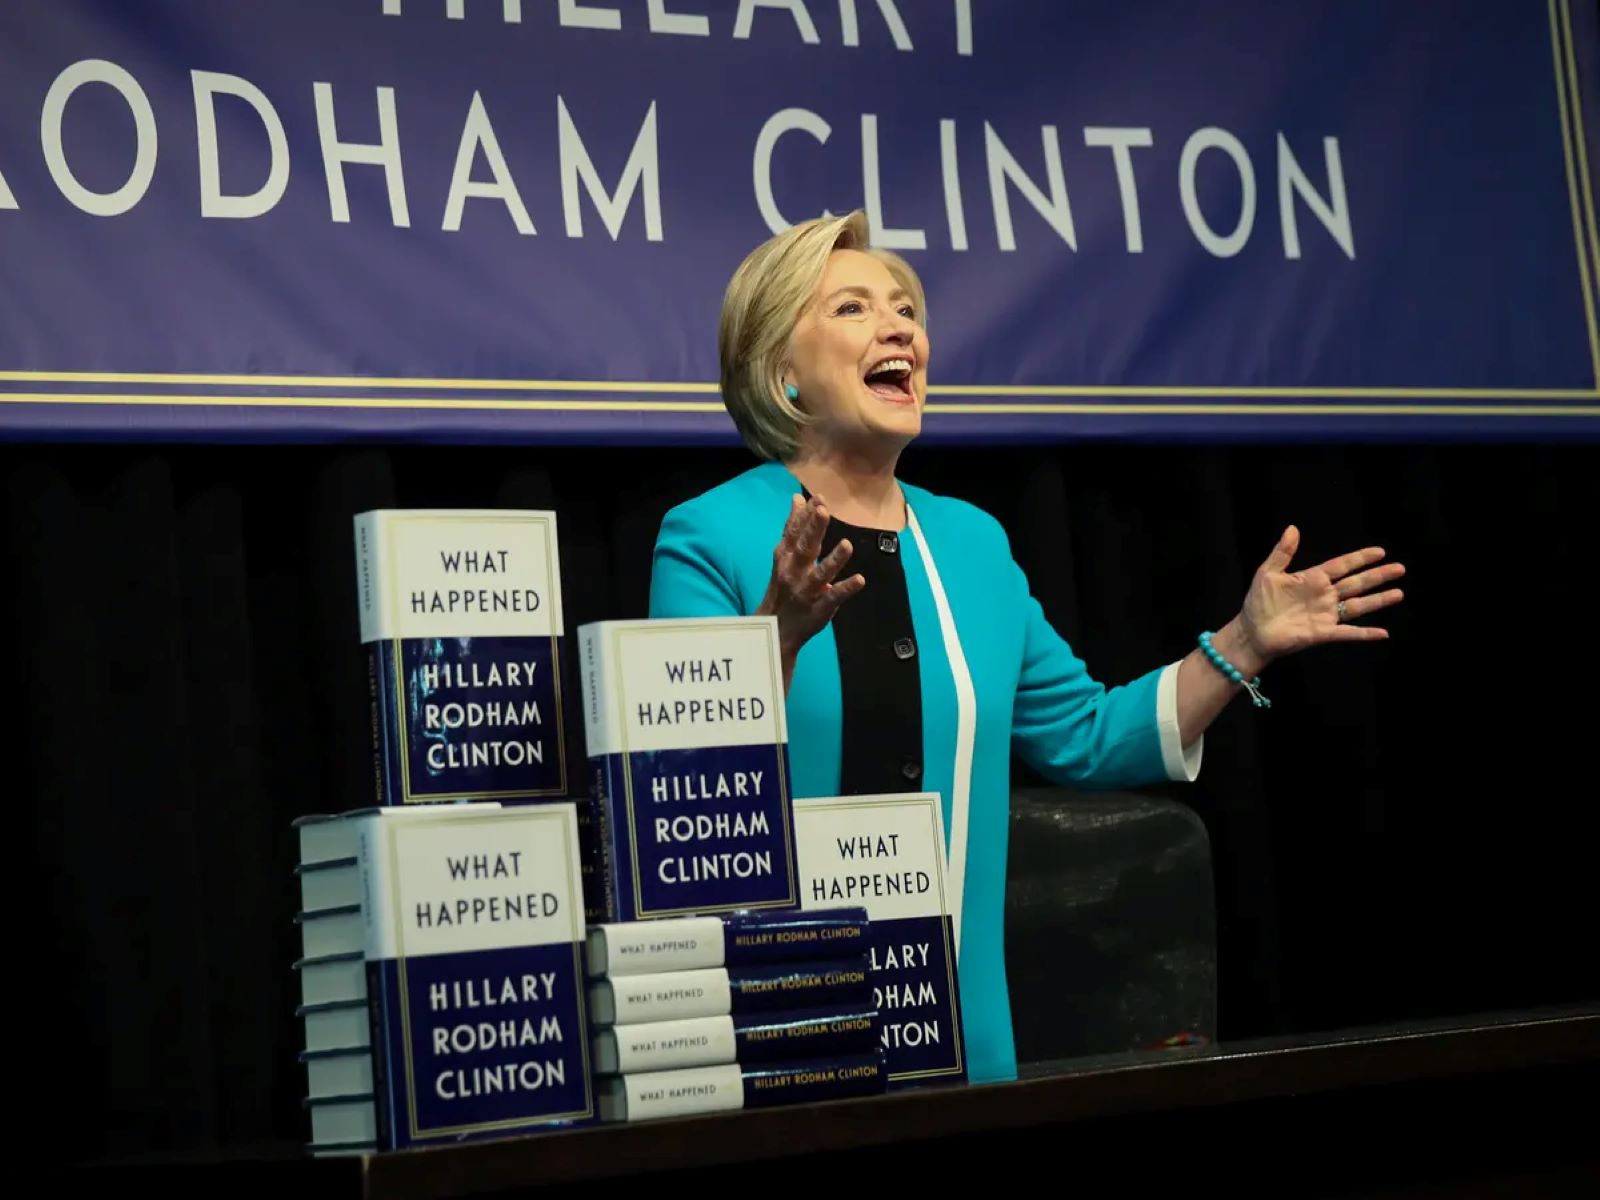 What Happened Hillary Clinton Audiobook